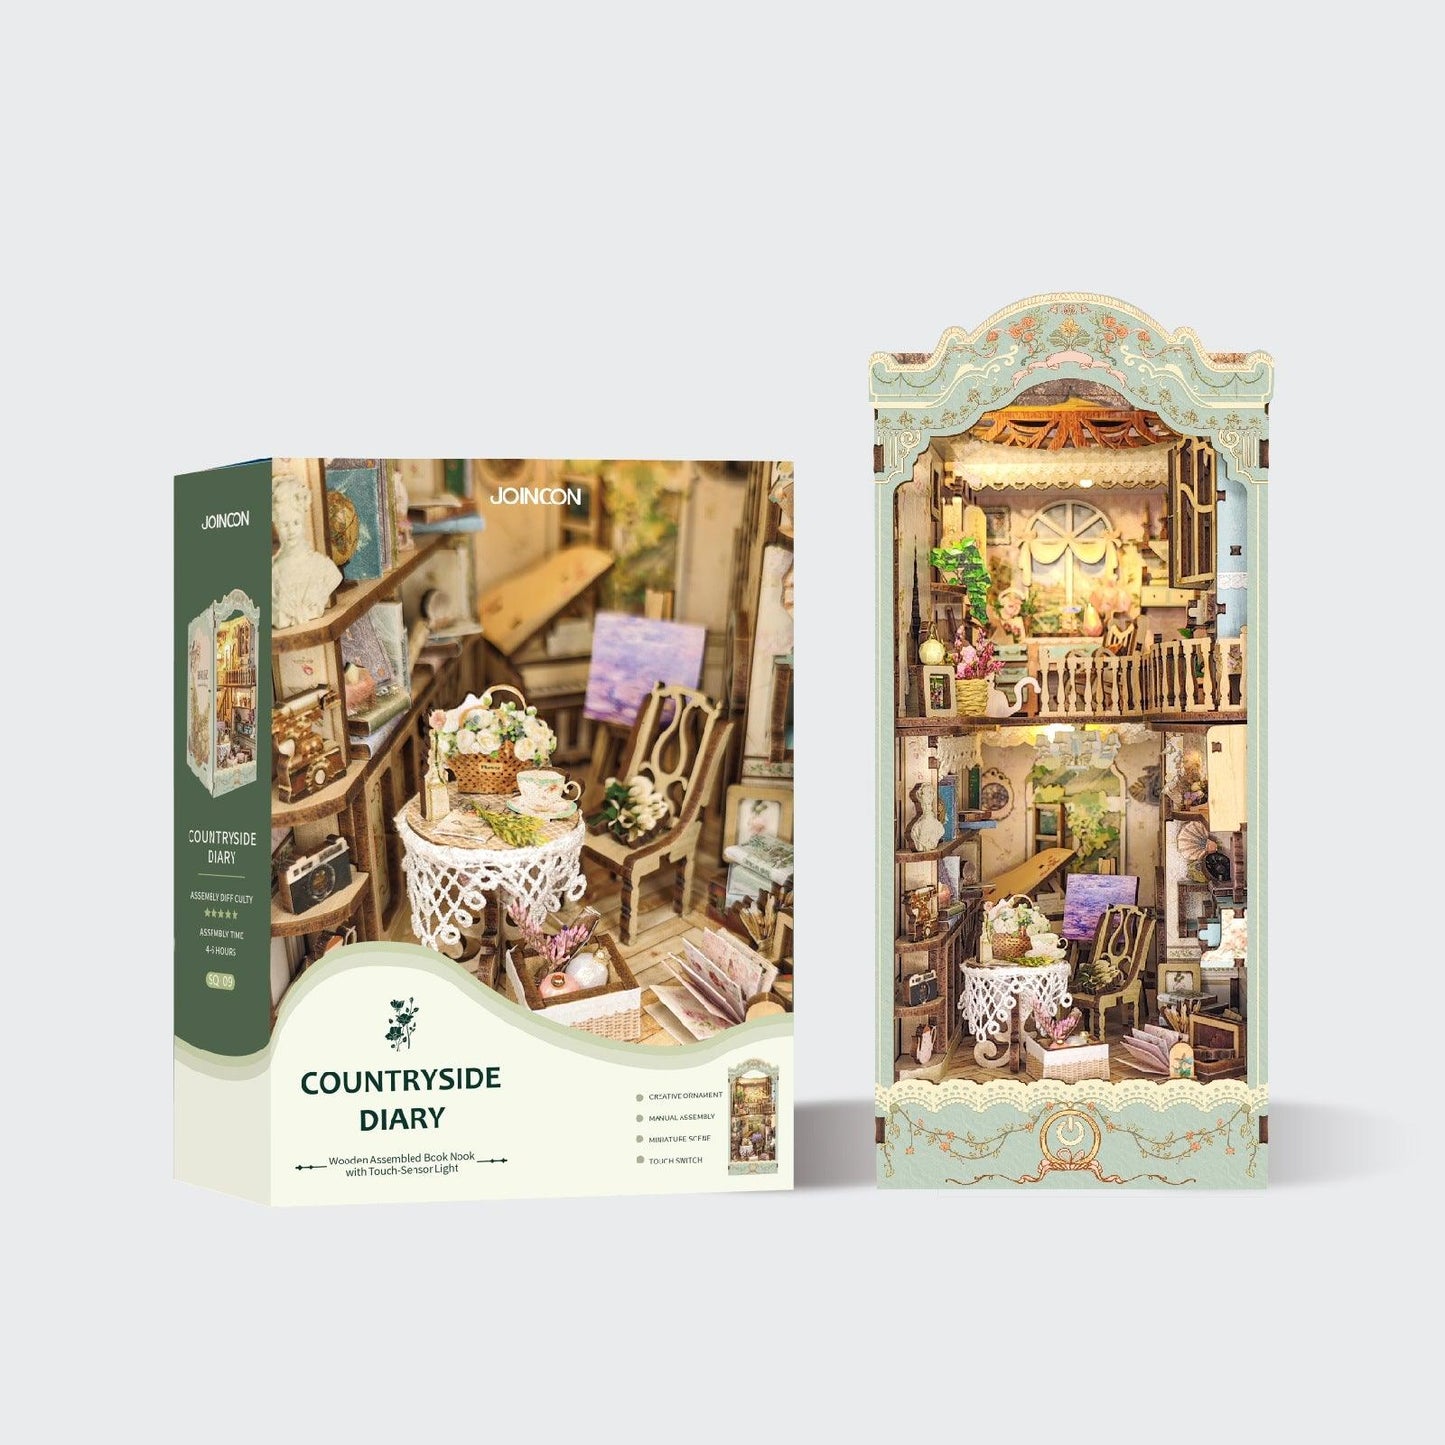 French countryside themed diy book nook kit - bookshelf insert diorama miniature package